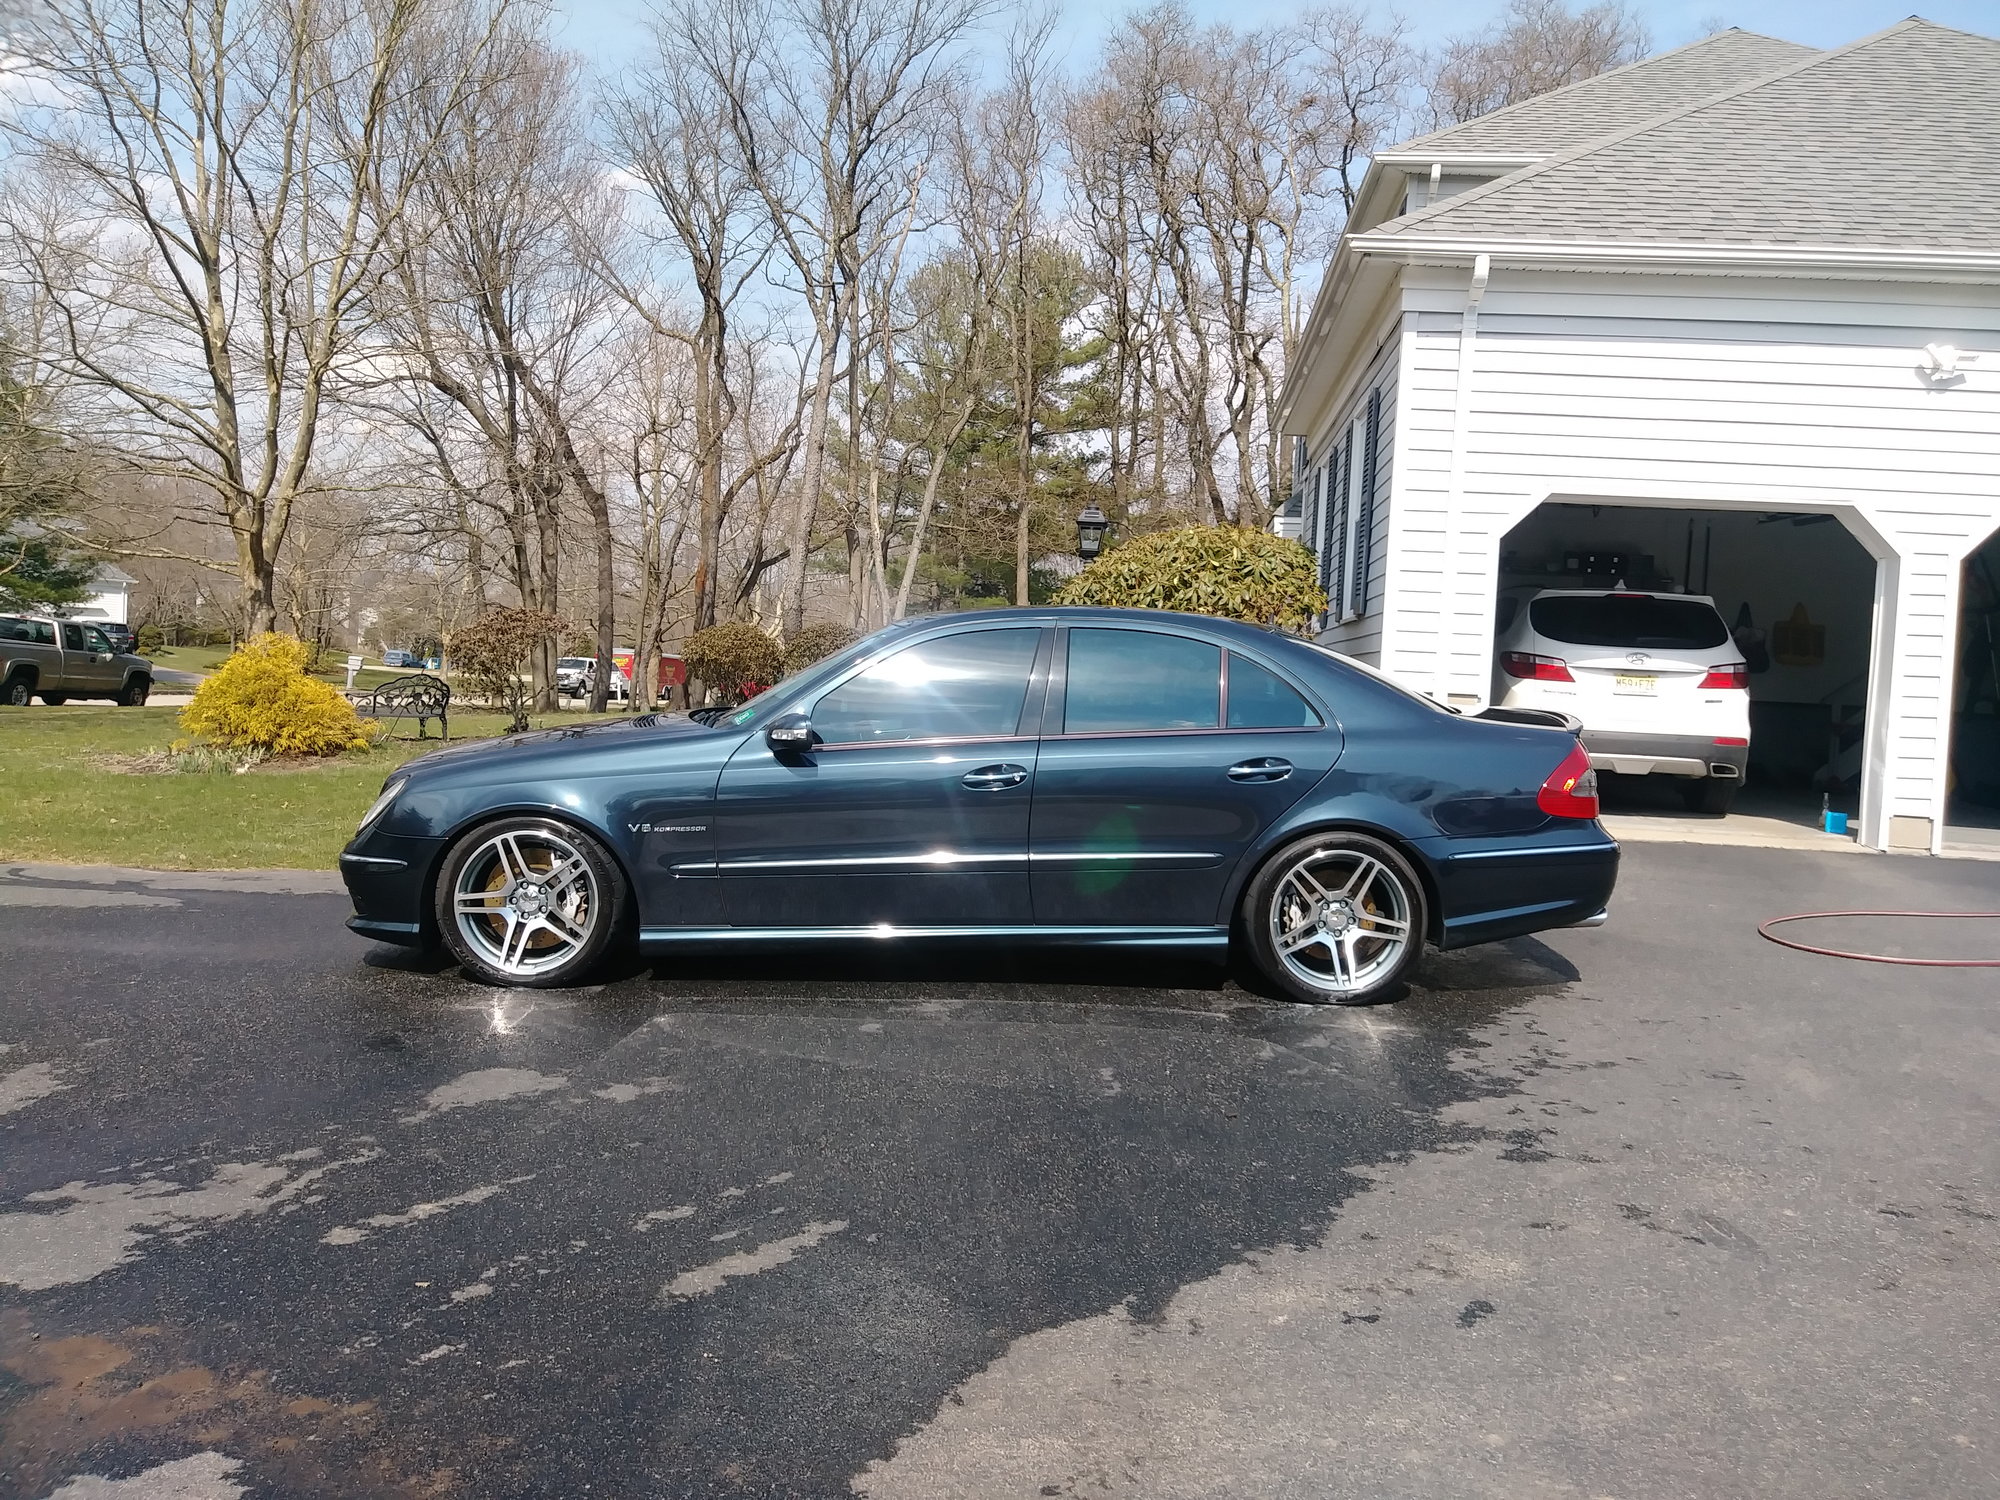 2005 Mercedes-Benz E55 AMG - 2005 Black Opal E55 91k miles w.mods - Used - VIN Wdbuf76j05a745324 - 91,000 Miles - 8 cyl - 2WD - Automatic - Sedan - Blue - Long Valley, NJ 07853, United States